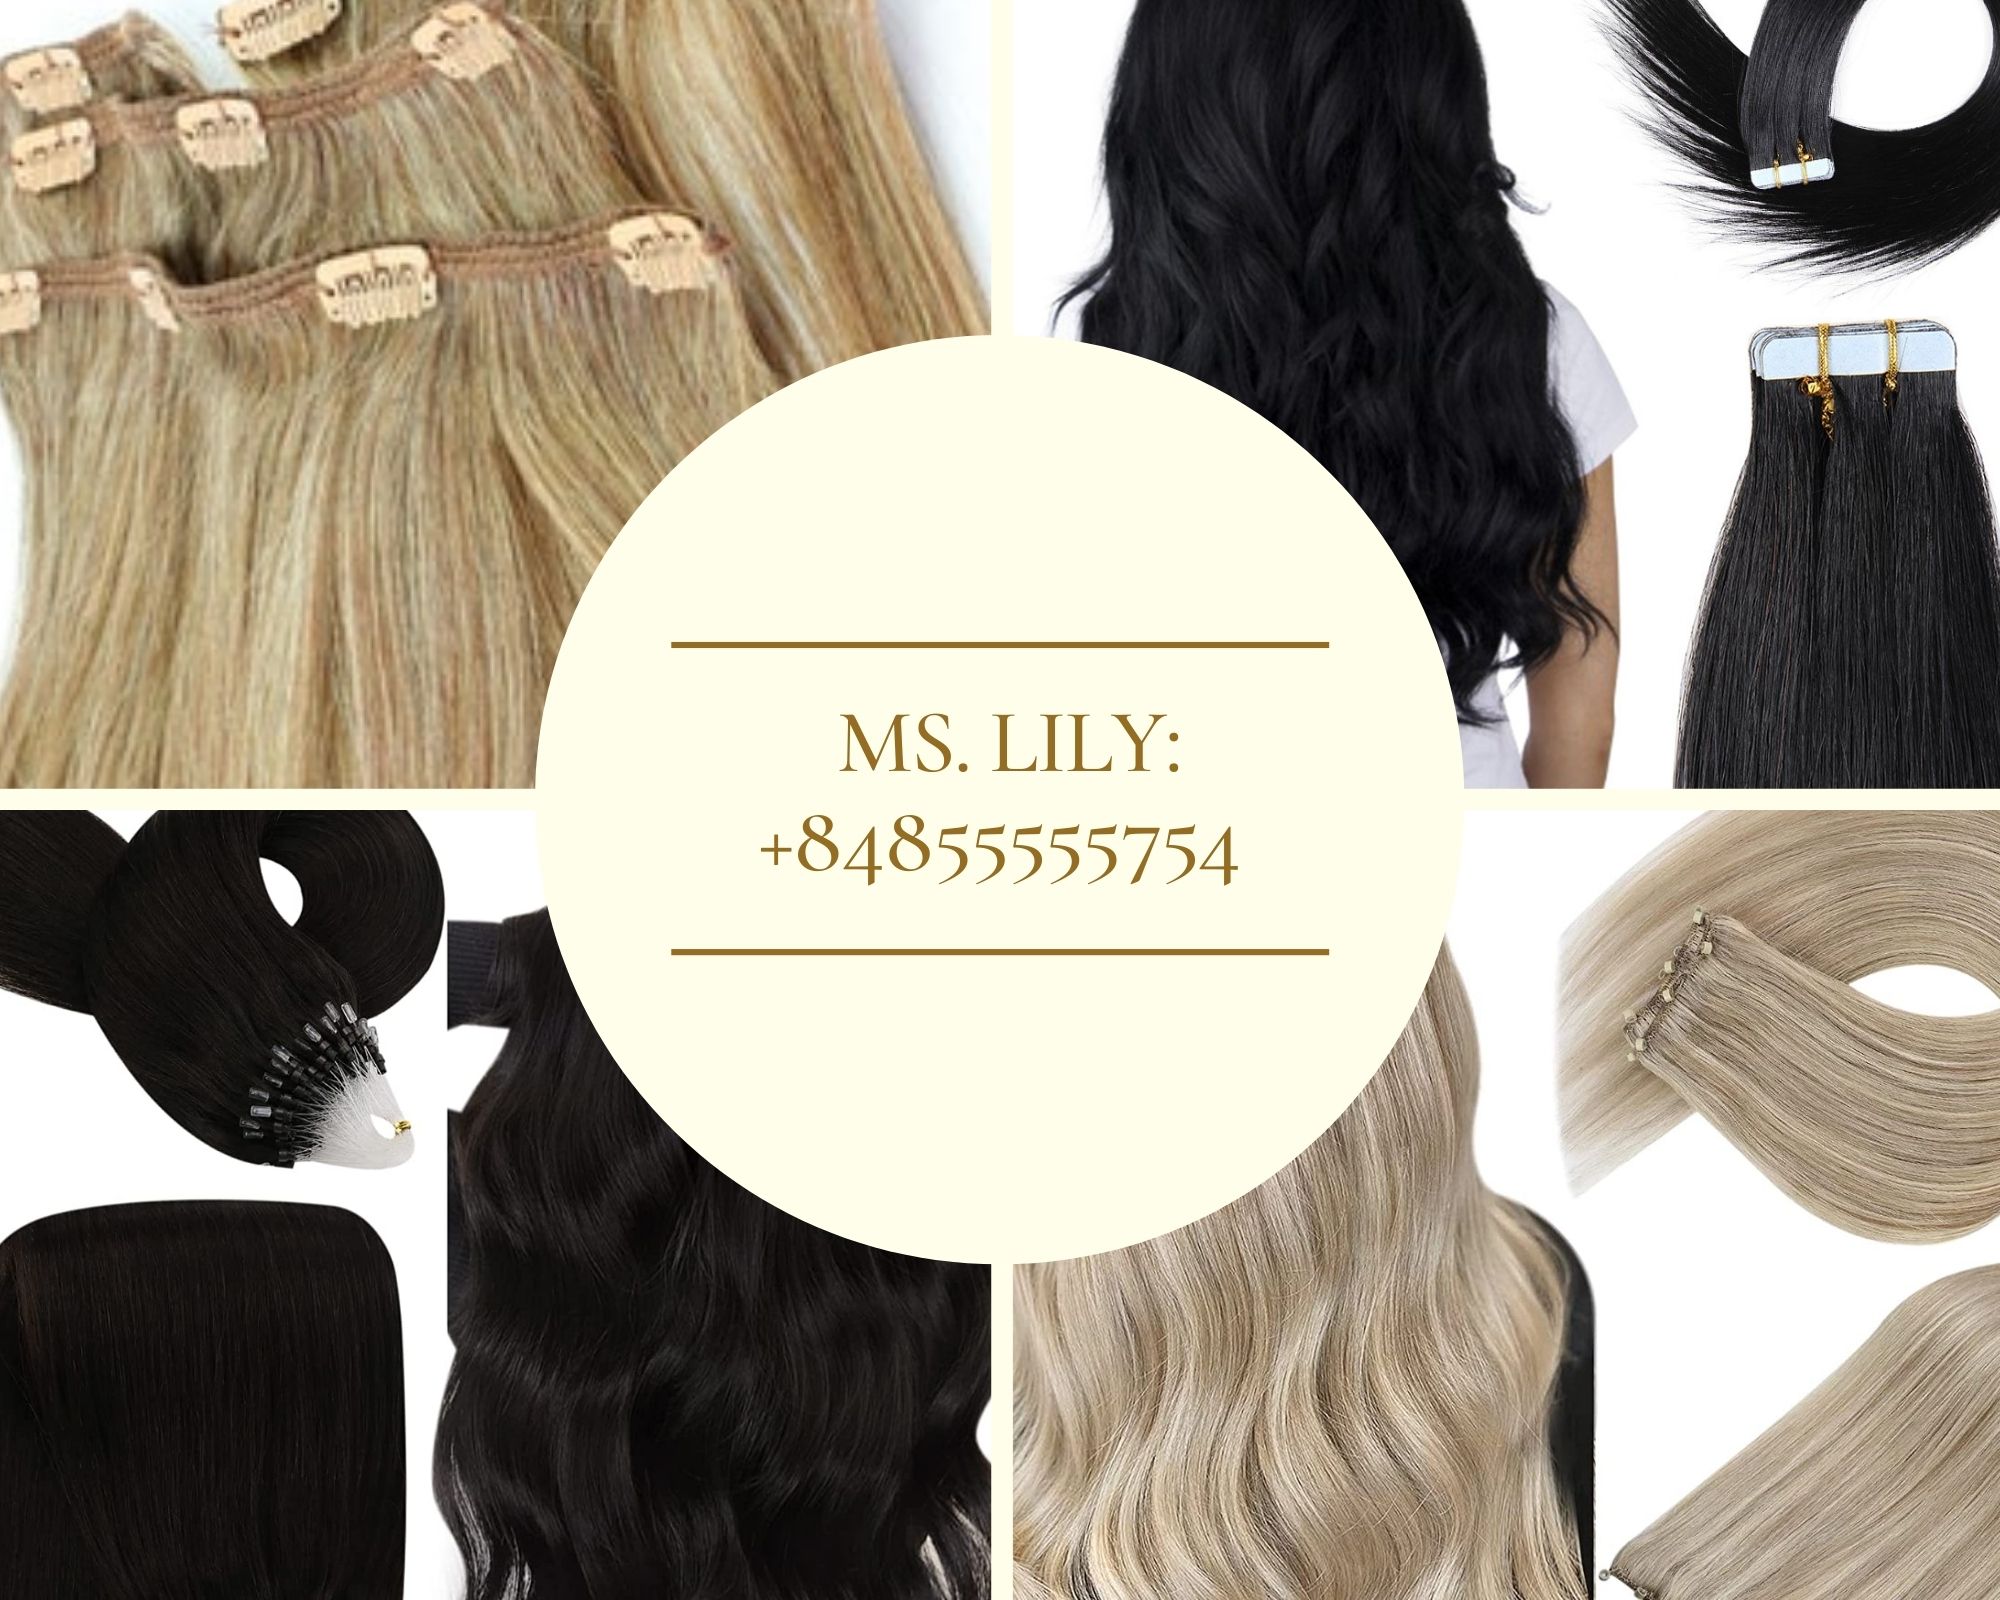 Hair extension wholesale Australia: novel and full of potential